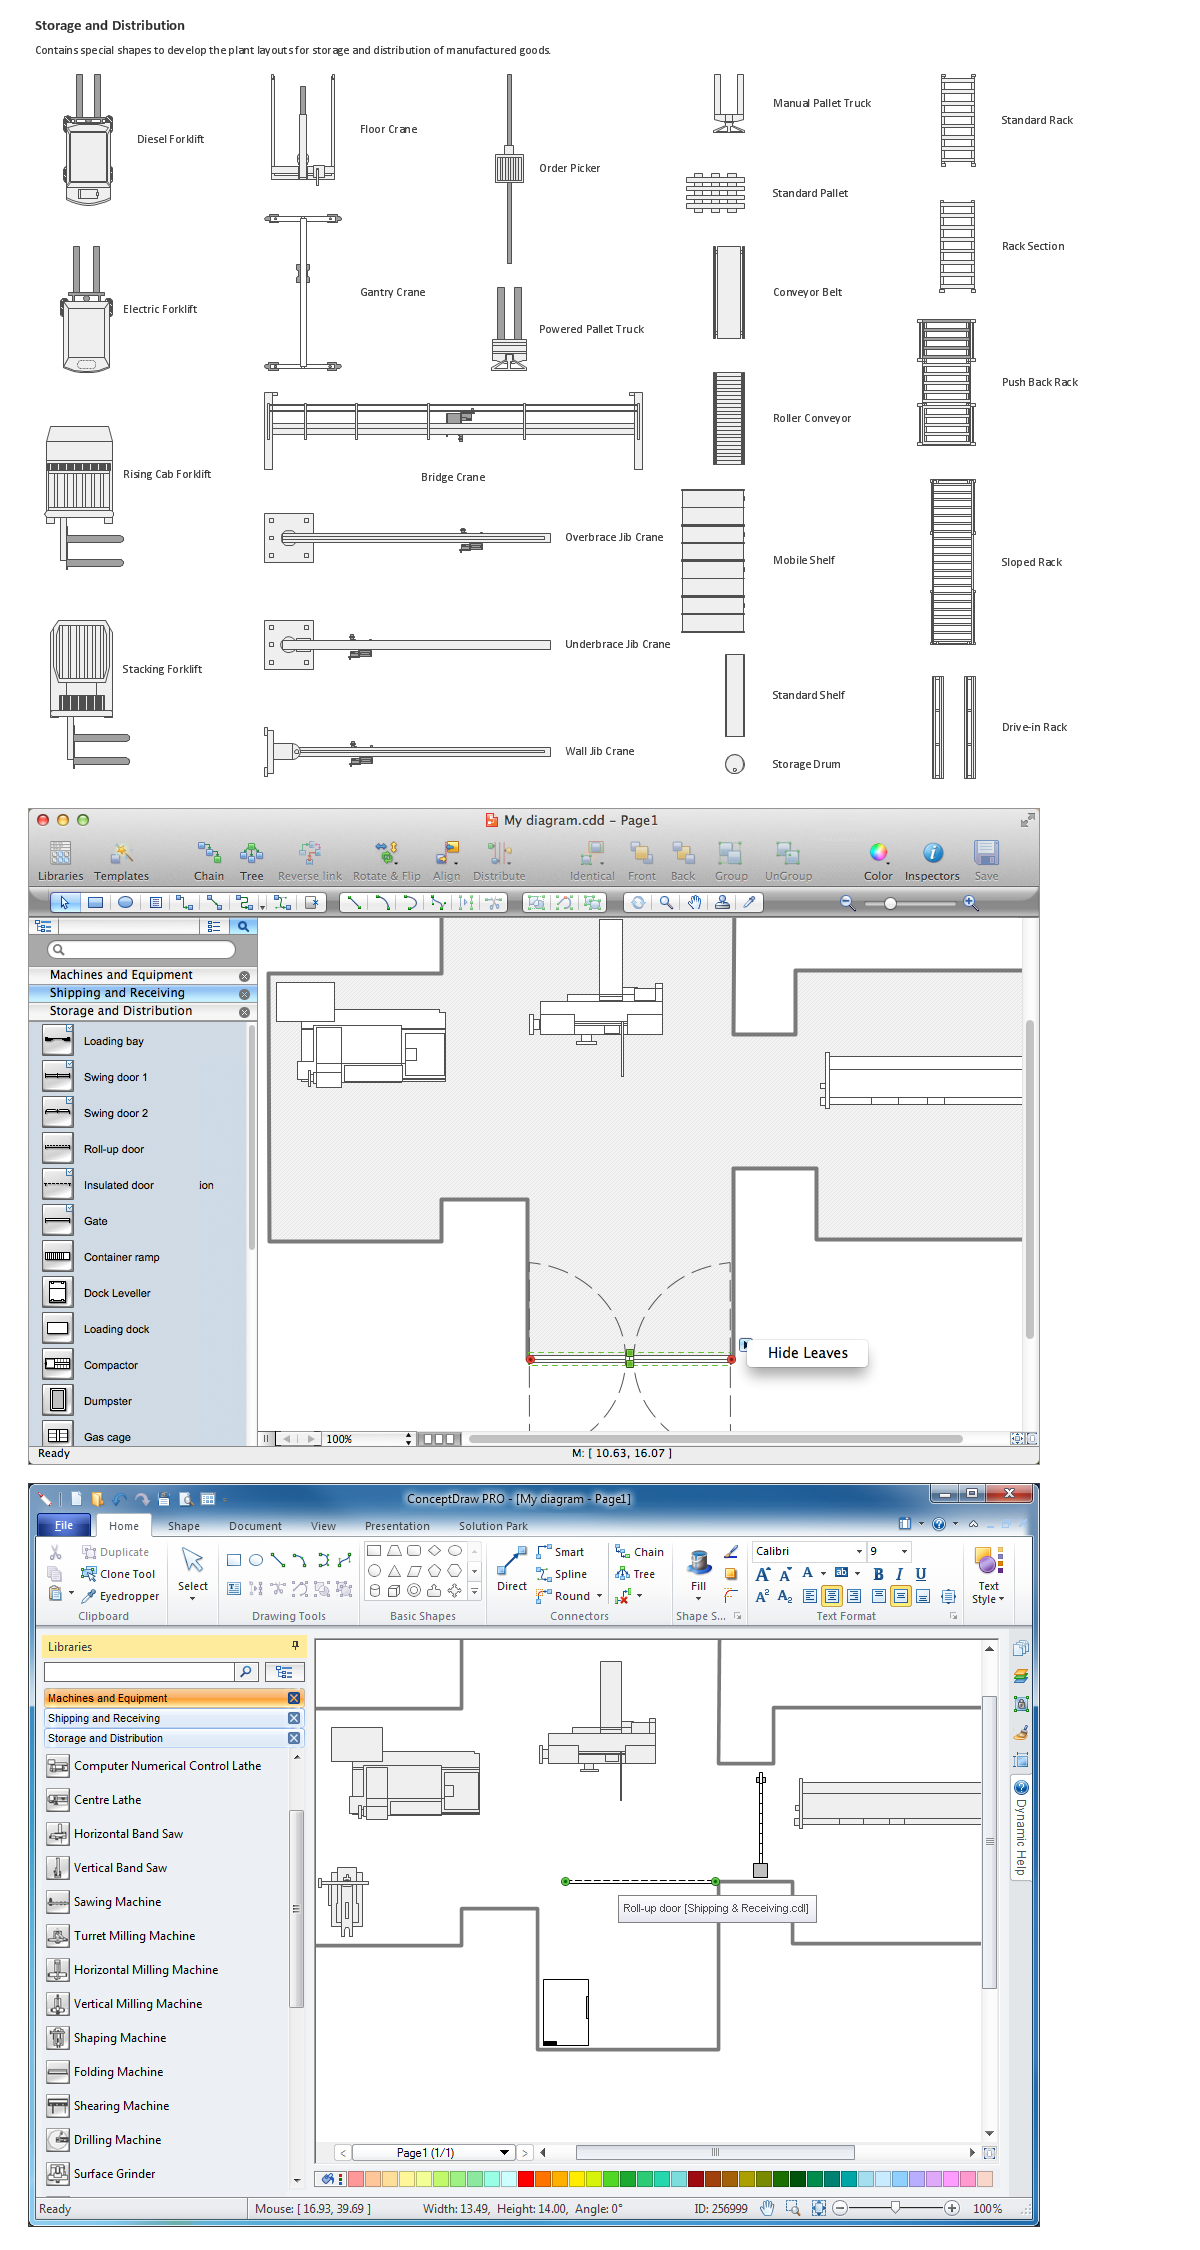 Building drawing software. Design elements of storage and distribution plant layout plans.